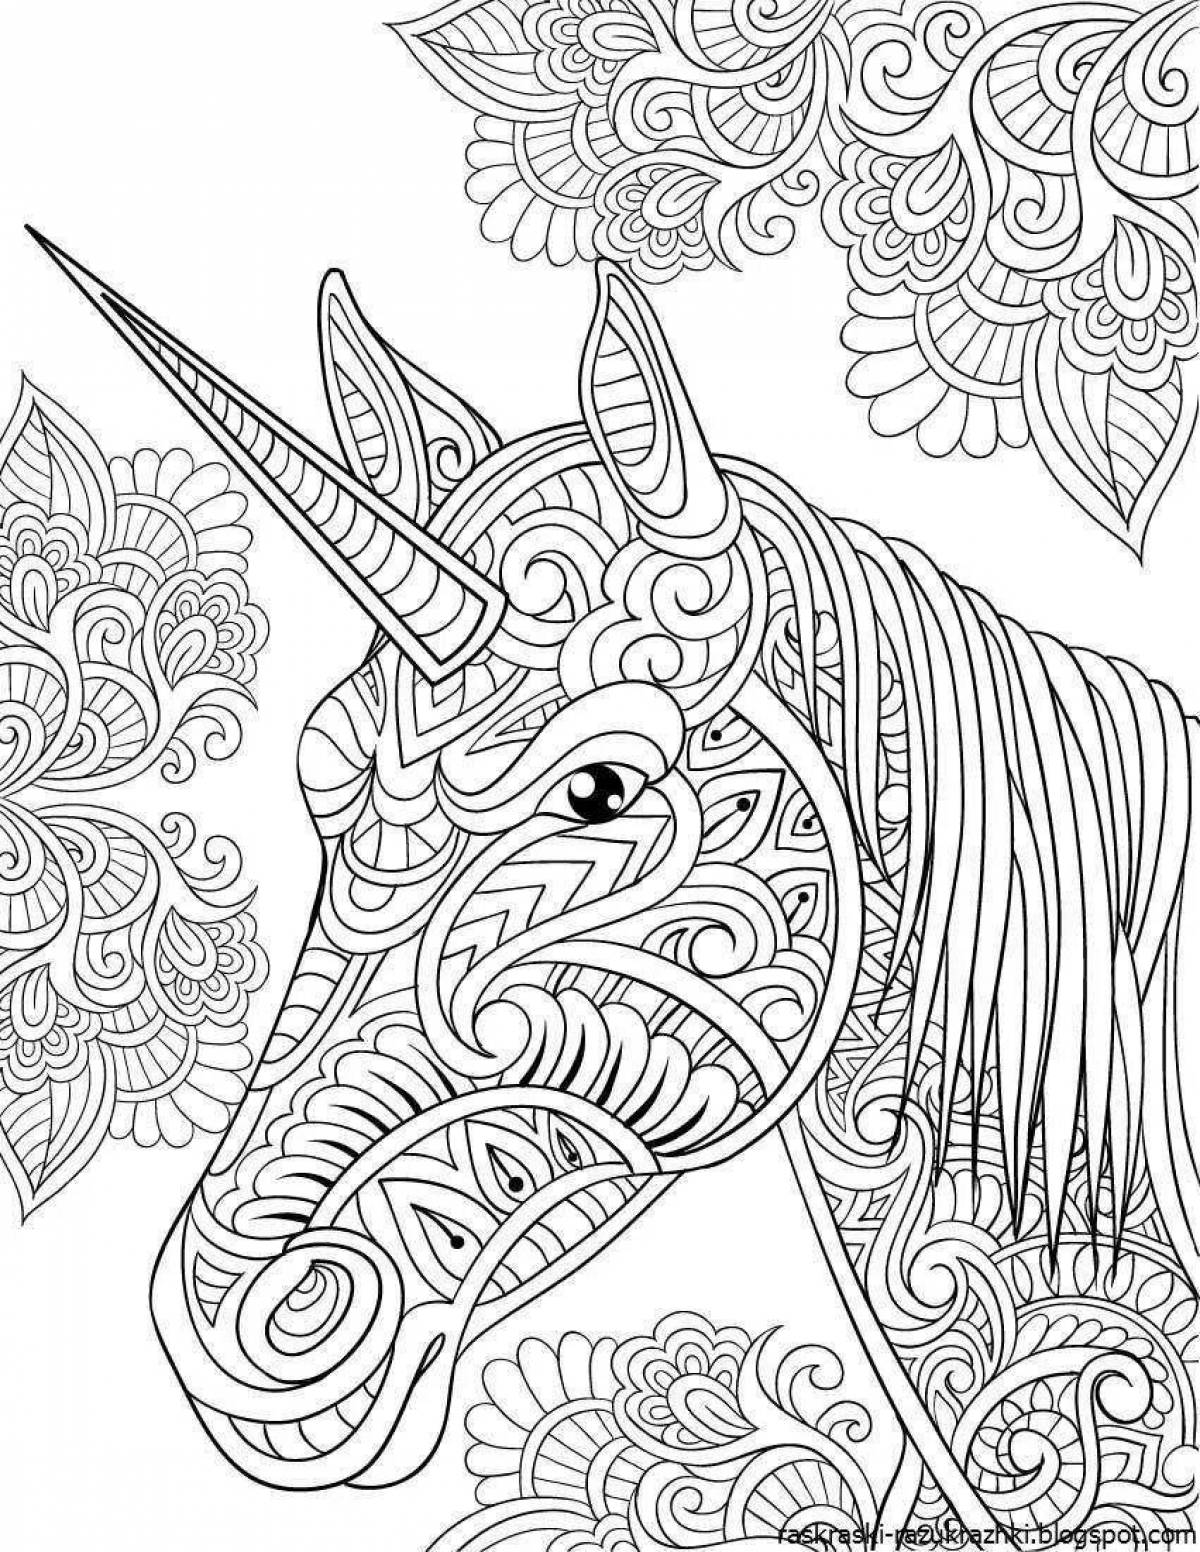 Coloring animals for adults